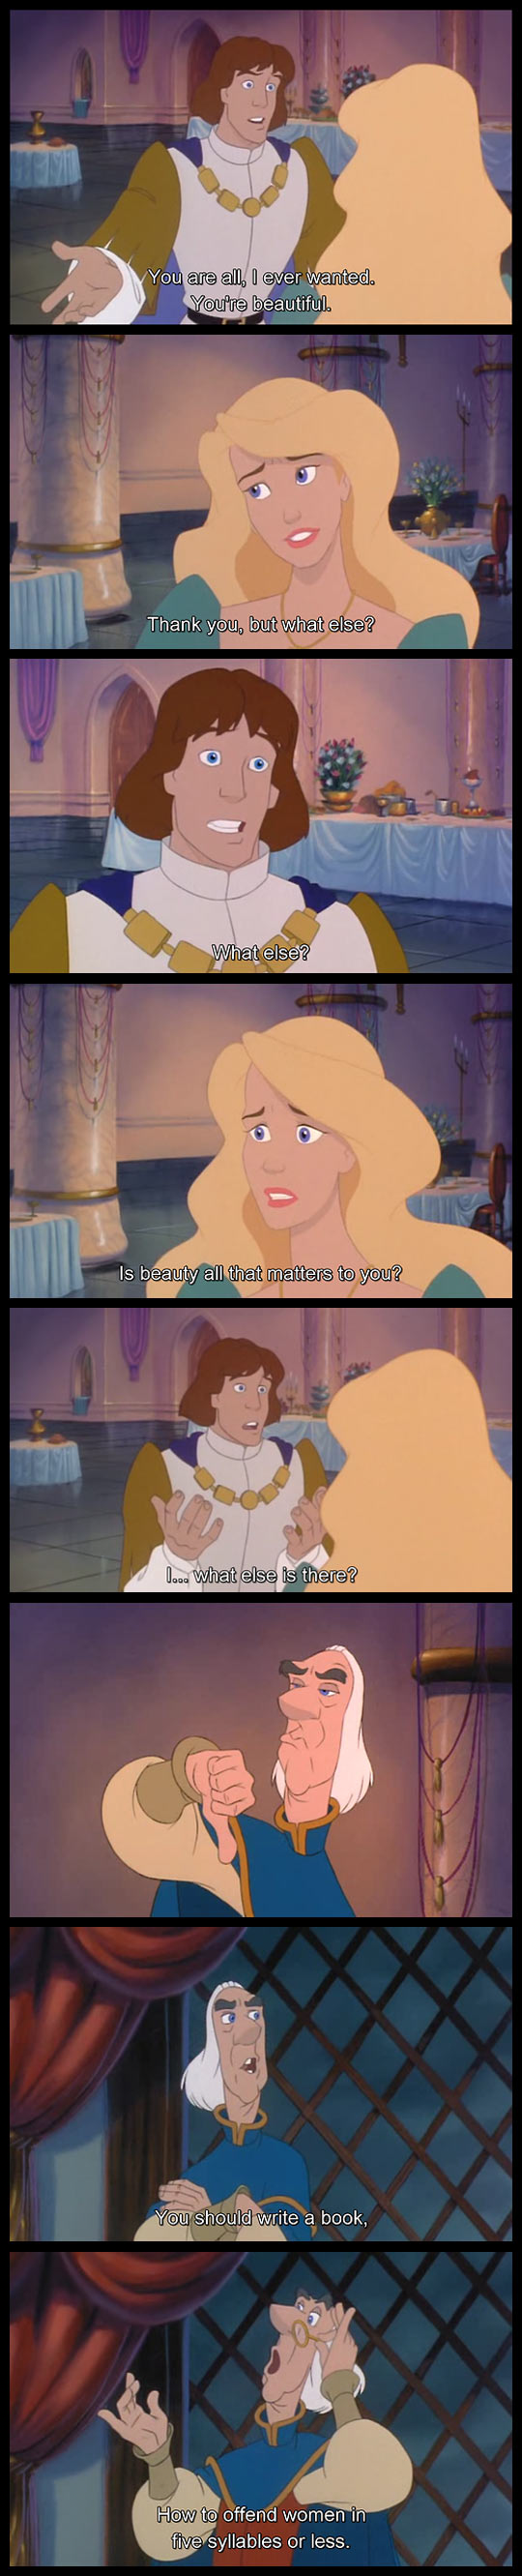 The Swan Princess, teaching little girls about how men don’t think before they speak since 1994…